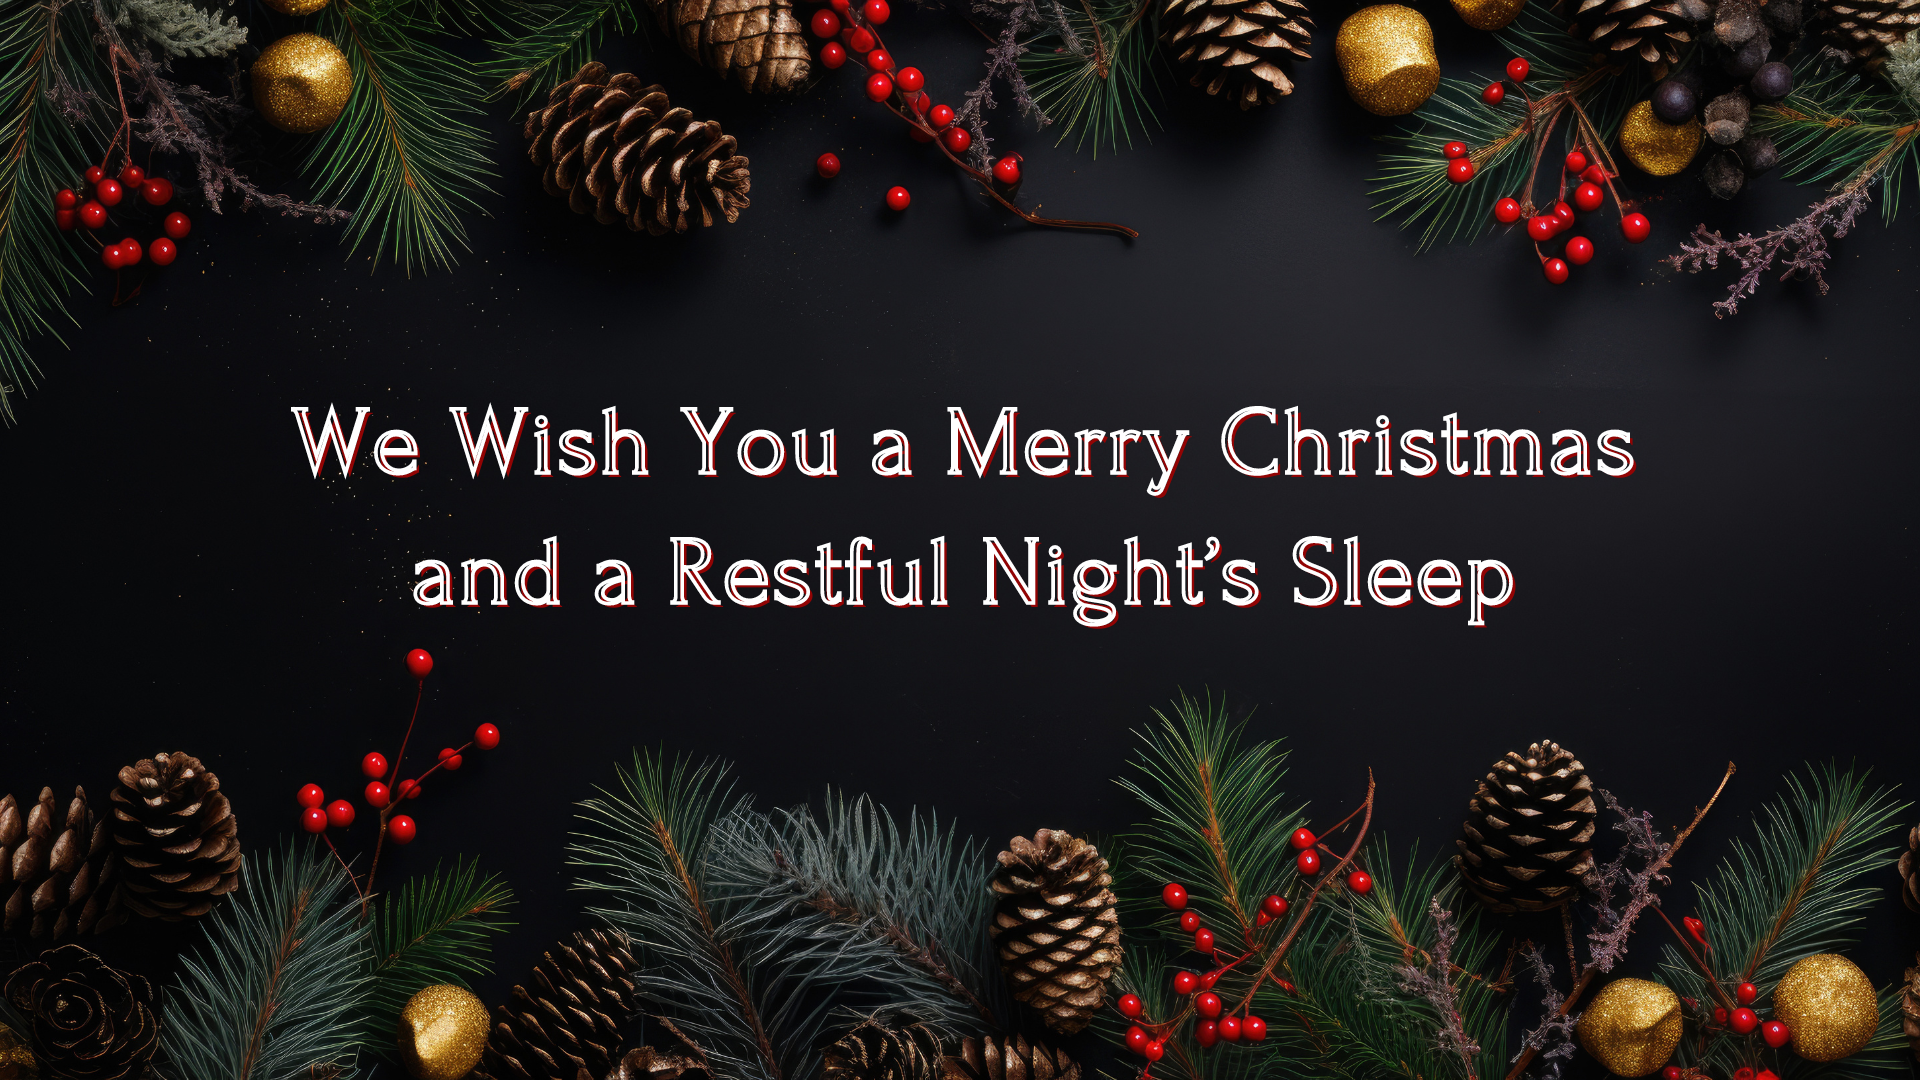 We Wish You a Merry Christmas and a Restful Night’s Sleep